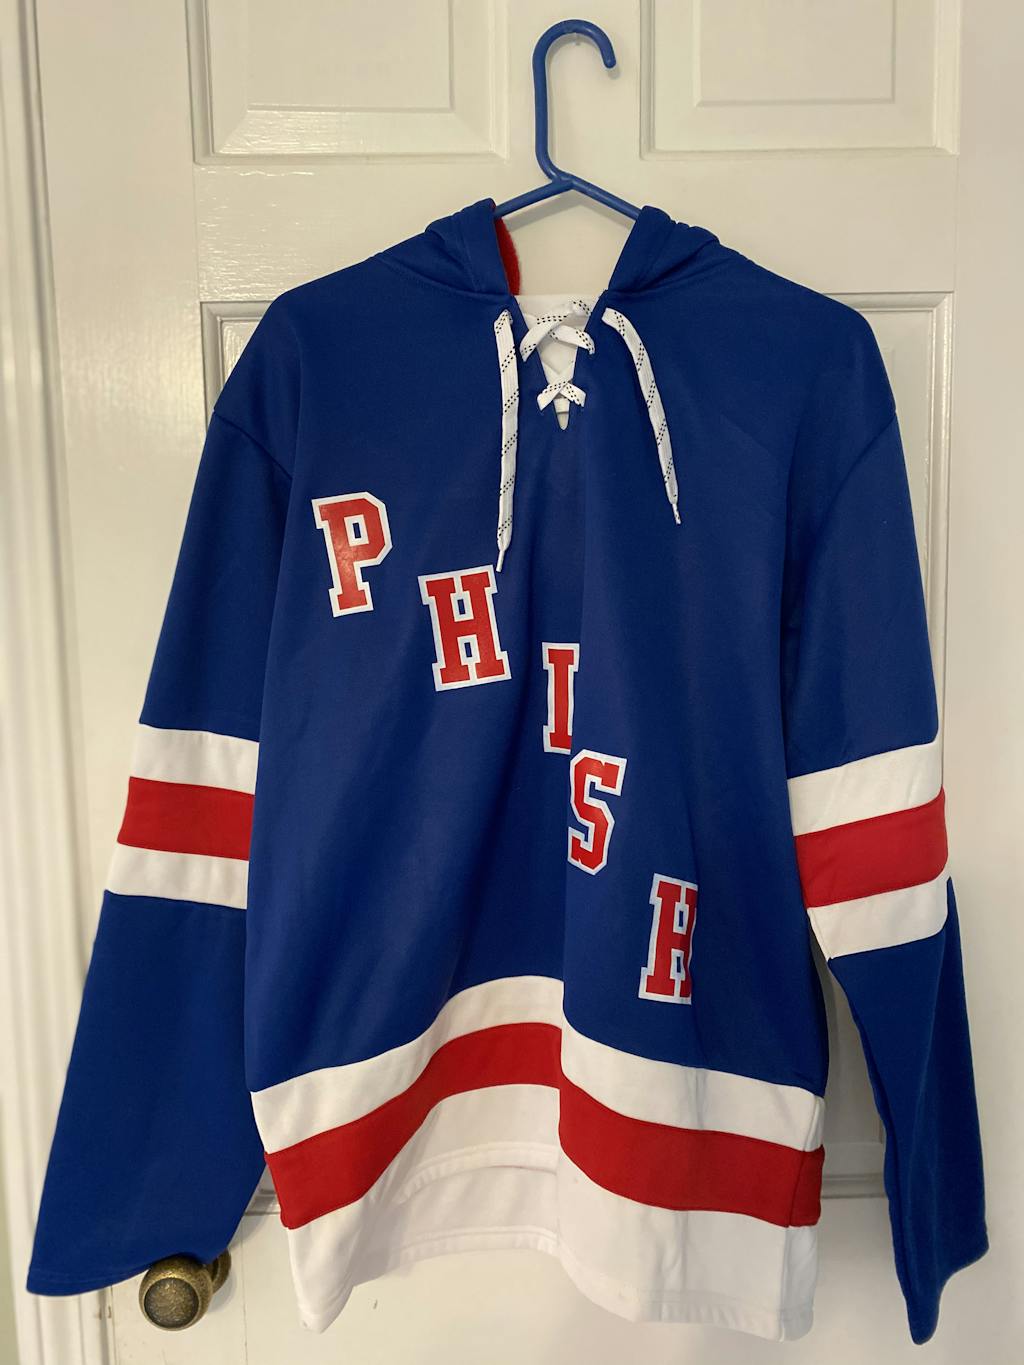 Buyer Beware - Old Time Hockey Lacer Hoodie. With the holidays coming up,  don't waste your money on this seemingly cool hoodie : r/rangers